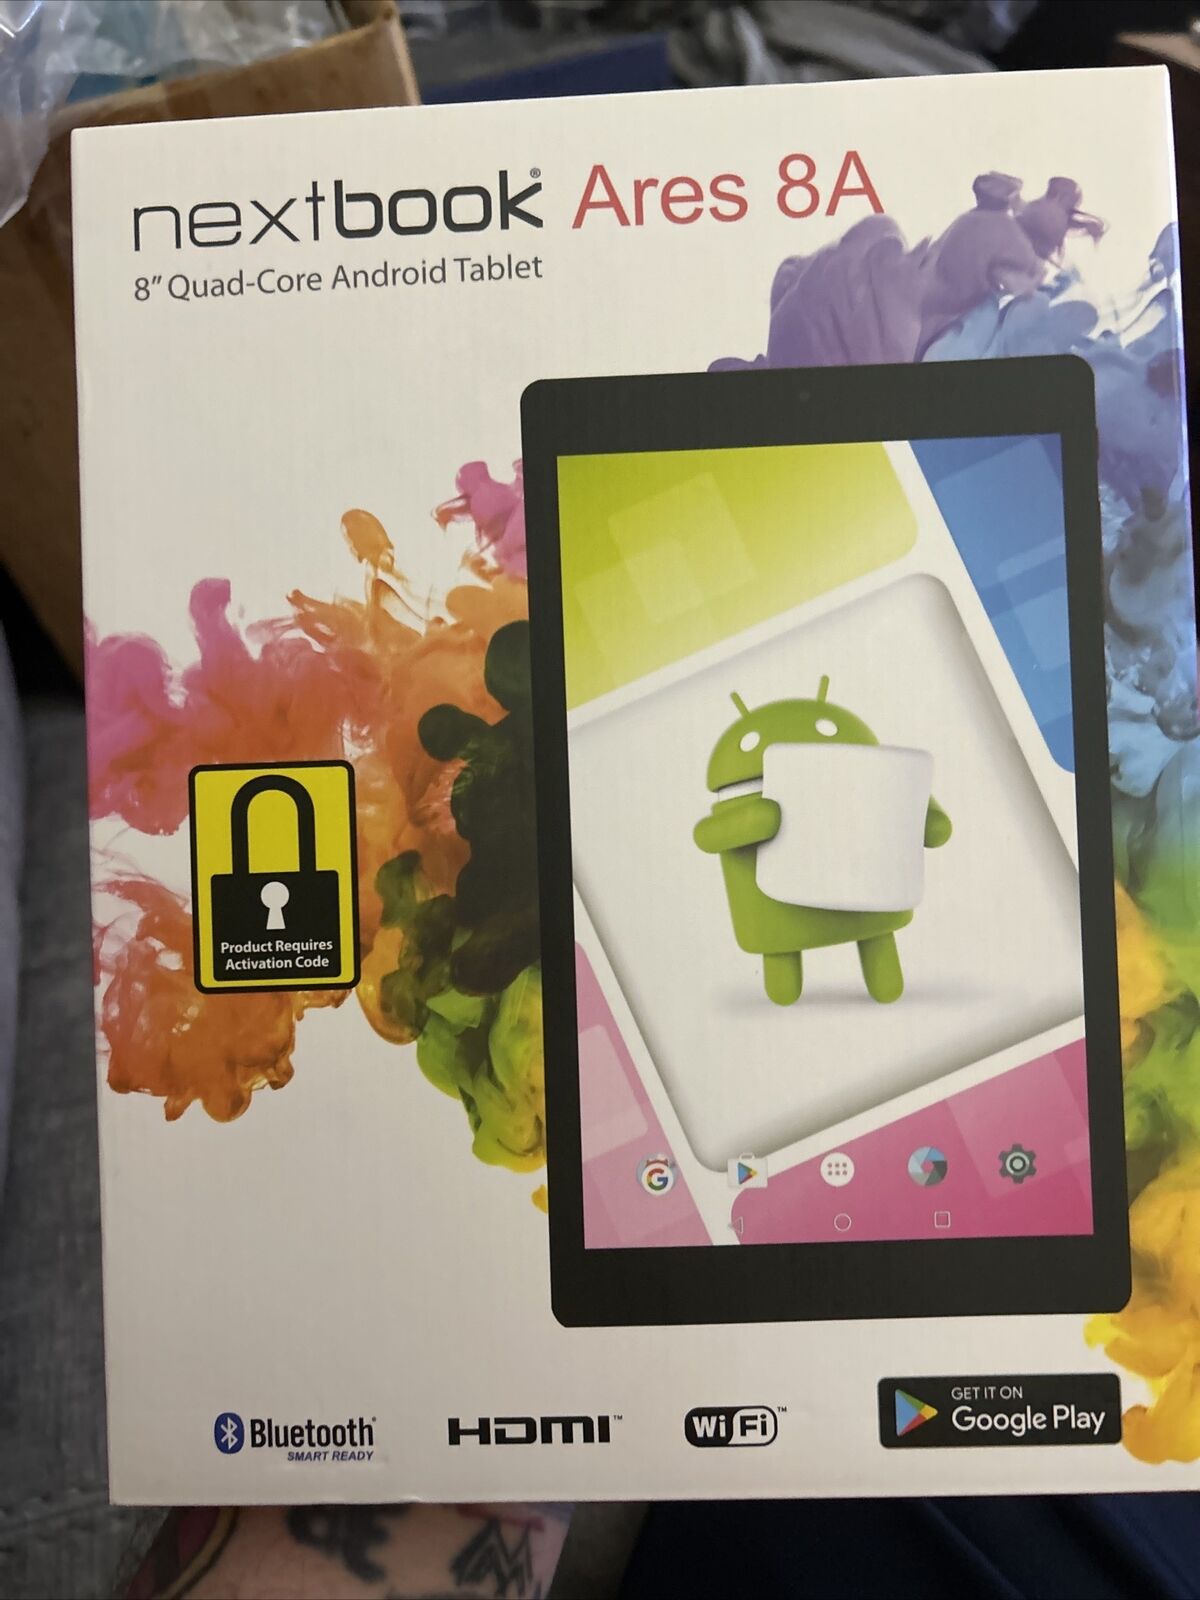 Nextbook Ares 8A New But Box Opened. Never Used. Activation Code Is In Box.